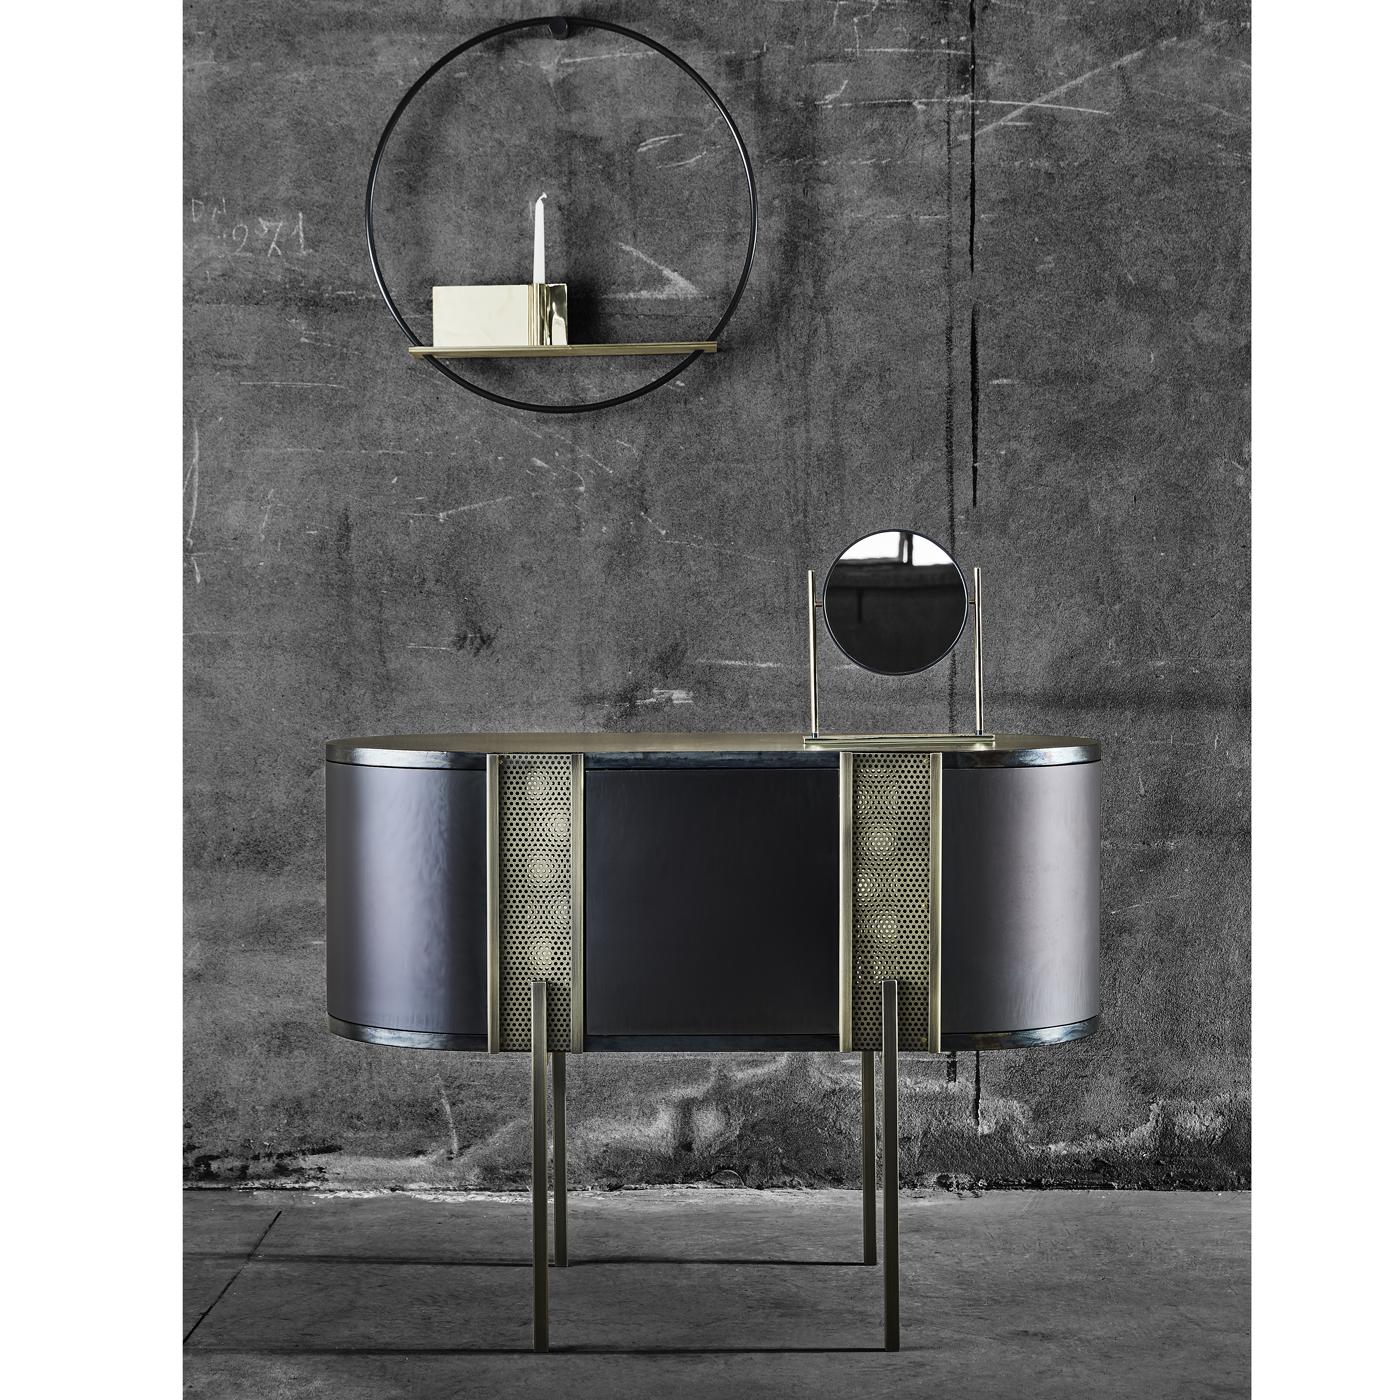 Designed by Lorenza Bozzoli, this sideboard can also double as a striking console in an entryway. Its contemporary design is made of four fine legs supporting a sinuous, elliptical shape accented with two nets that add grace and a touch of mystery